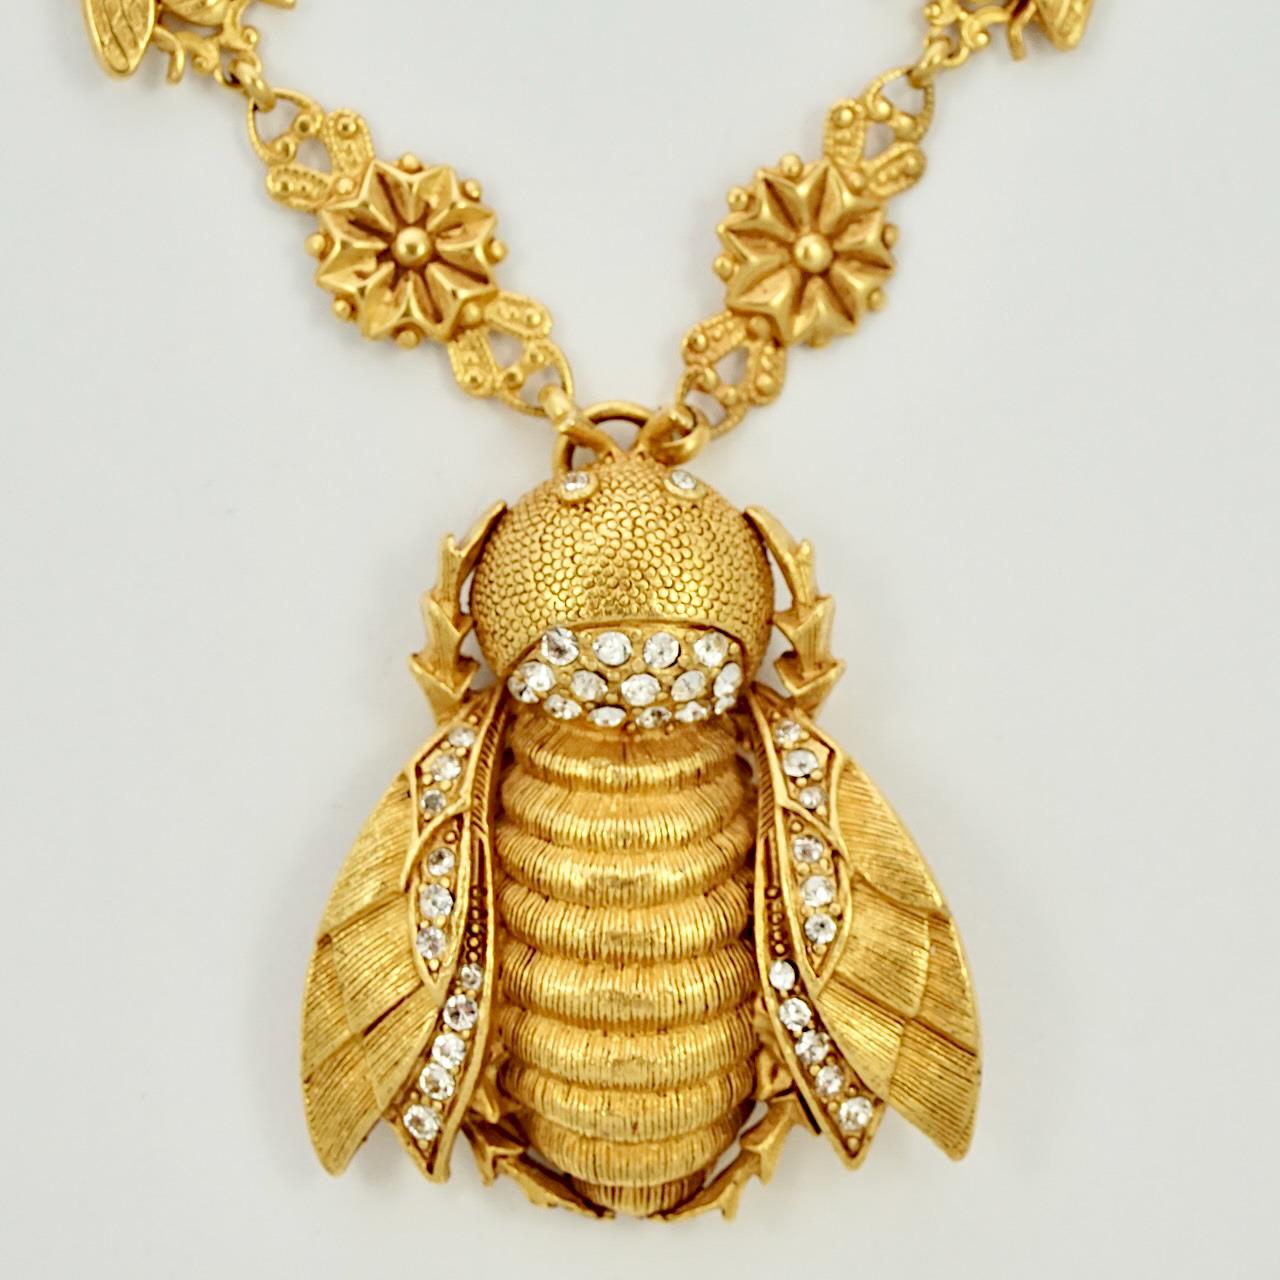 Fabulous Askew London antiqued gold plated necklace featuring a beautiful large textured bee pendant with crystals. The bee is on a lovely brass fly and flower link chain necklace. Measuring necklace length 42.5 cm / 16.75 inches, and the bee